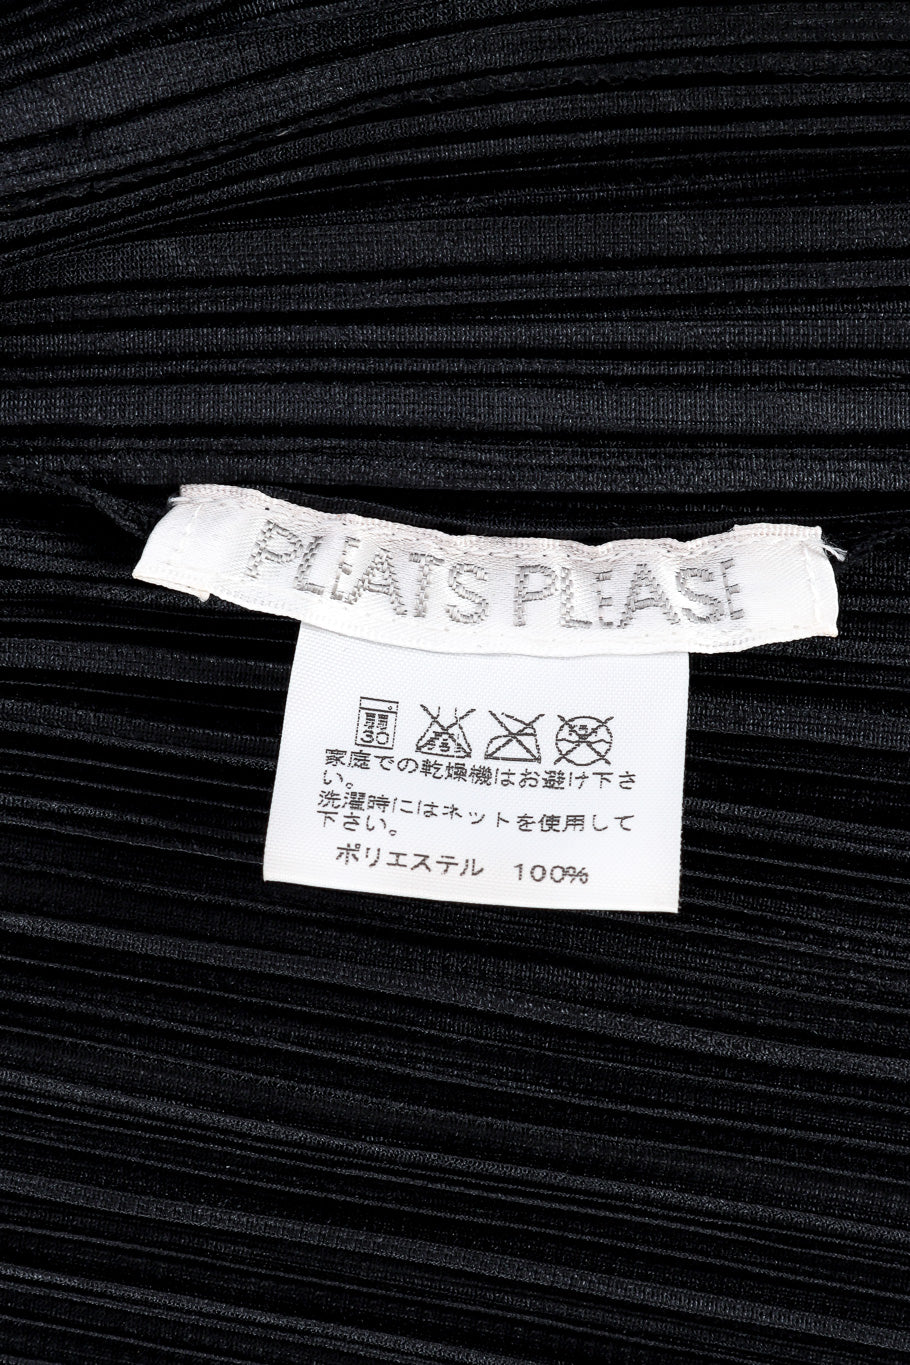 Pleated skirt, top, and jacket set by Issey Miyake flat lay label shell @recessla